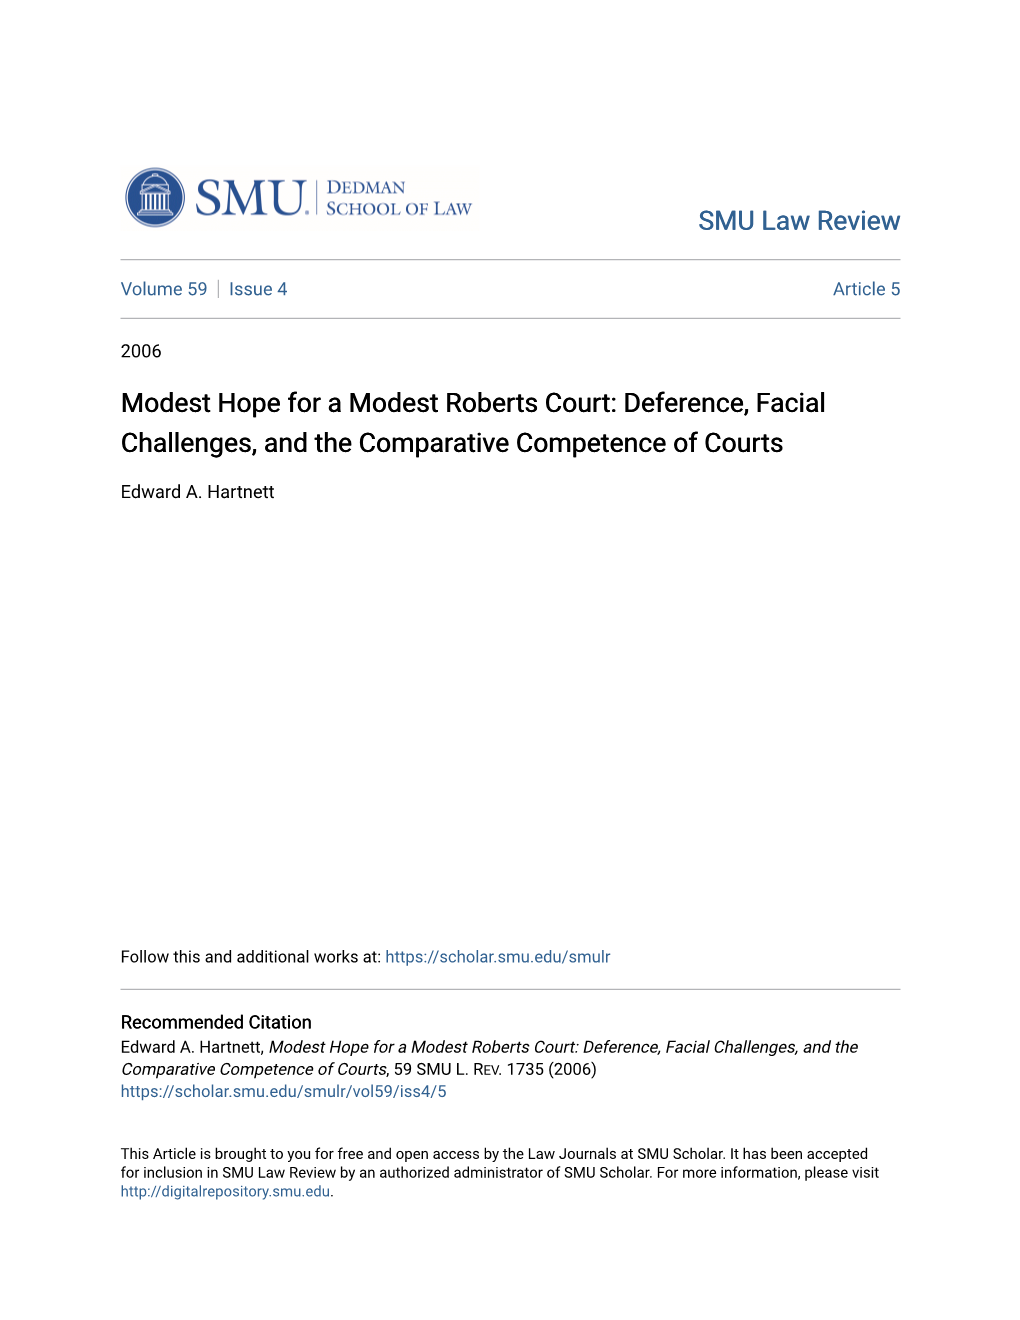 Modest Hope for a Modest Roberts Court: Deference, Facial Challenges, and the Comparative Competence of Courts